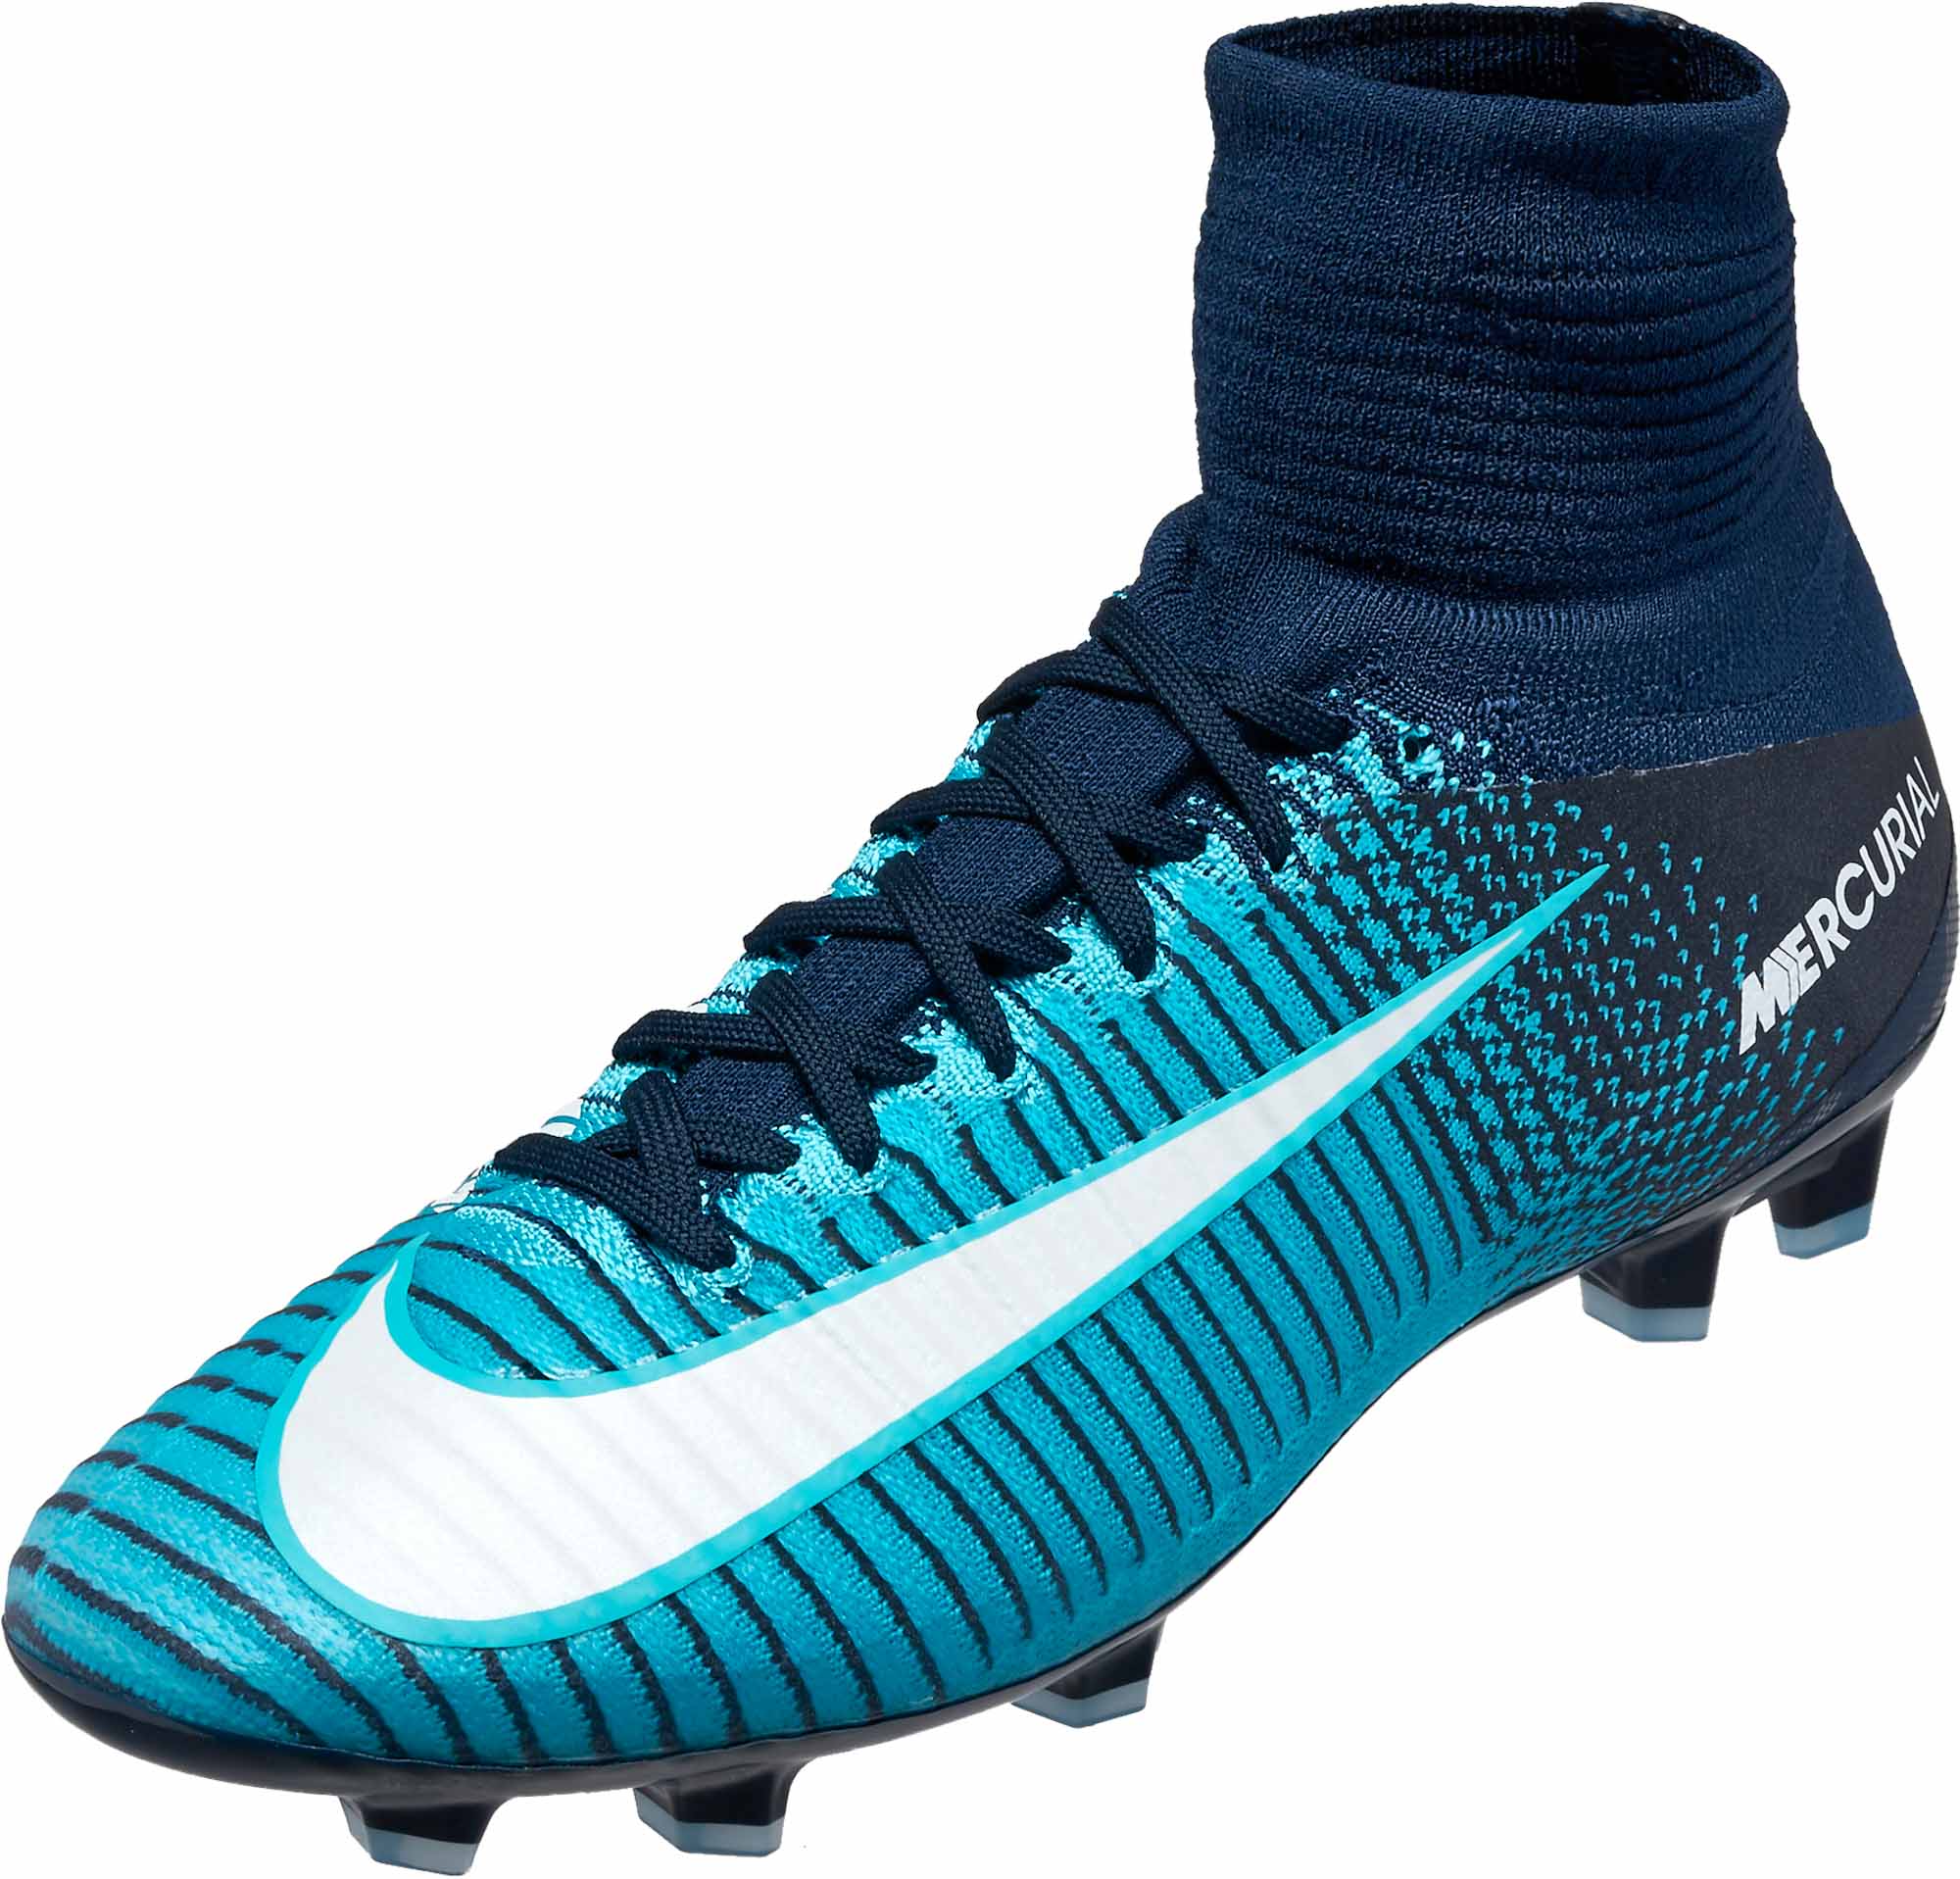 new nike high top soccer cleats